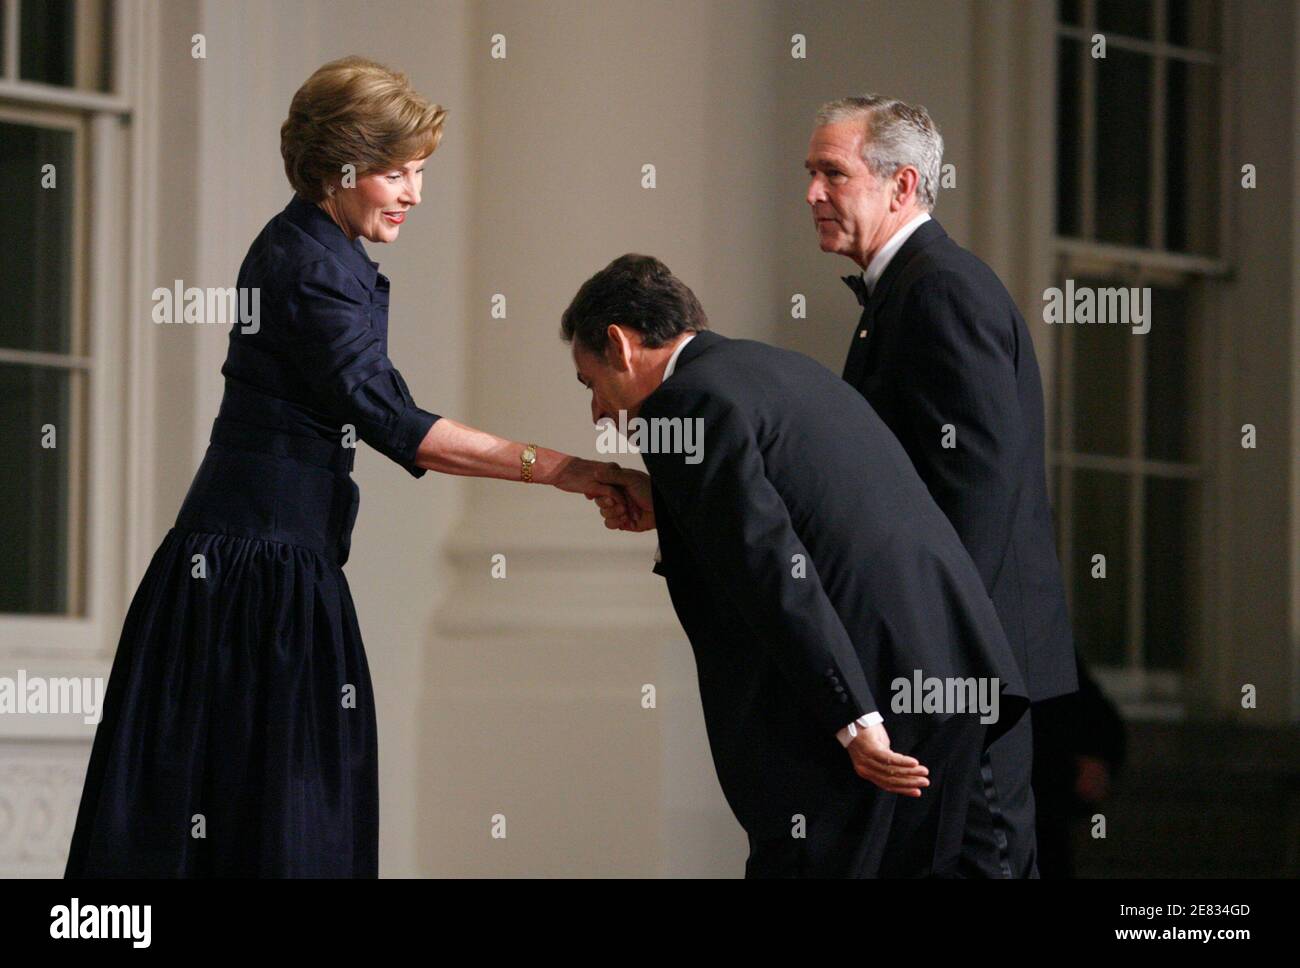 French President Nicolas Sarkozy (C) kisses the hand of First Lady Laura  Bush as U.S. President George W. Bush looks on upon his arrival for dinner  at the White House in Washington